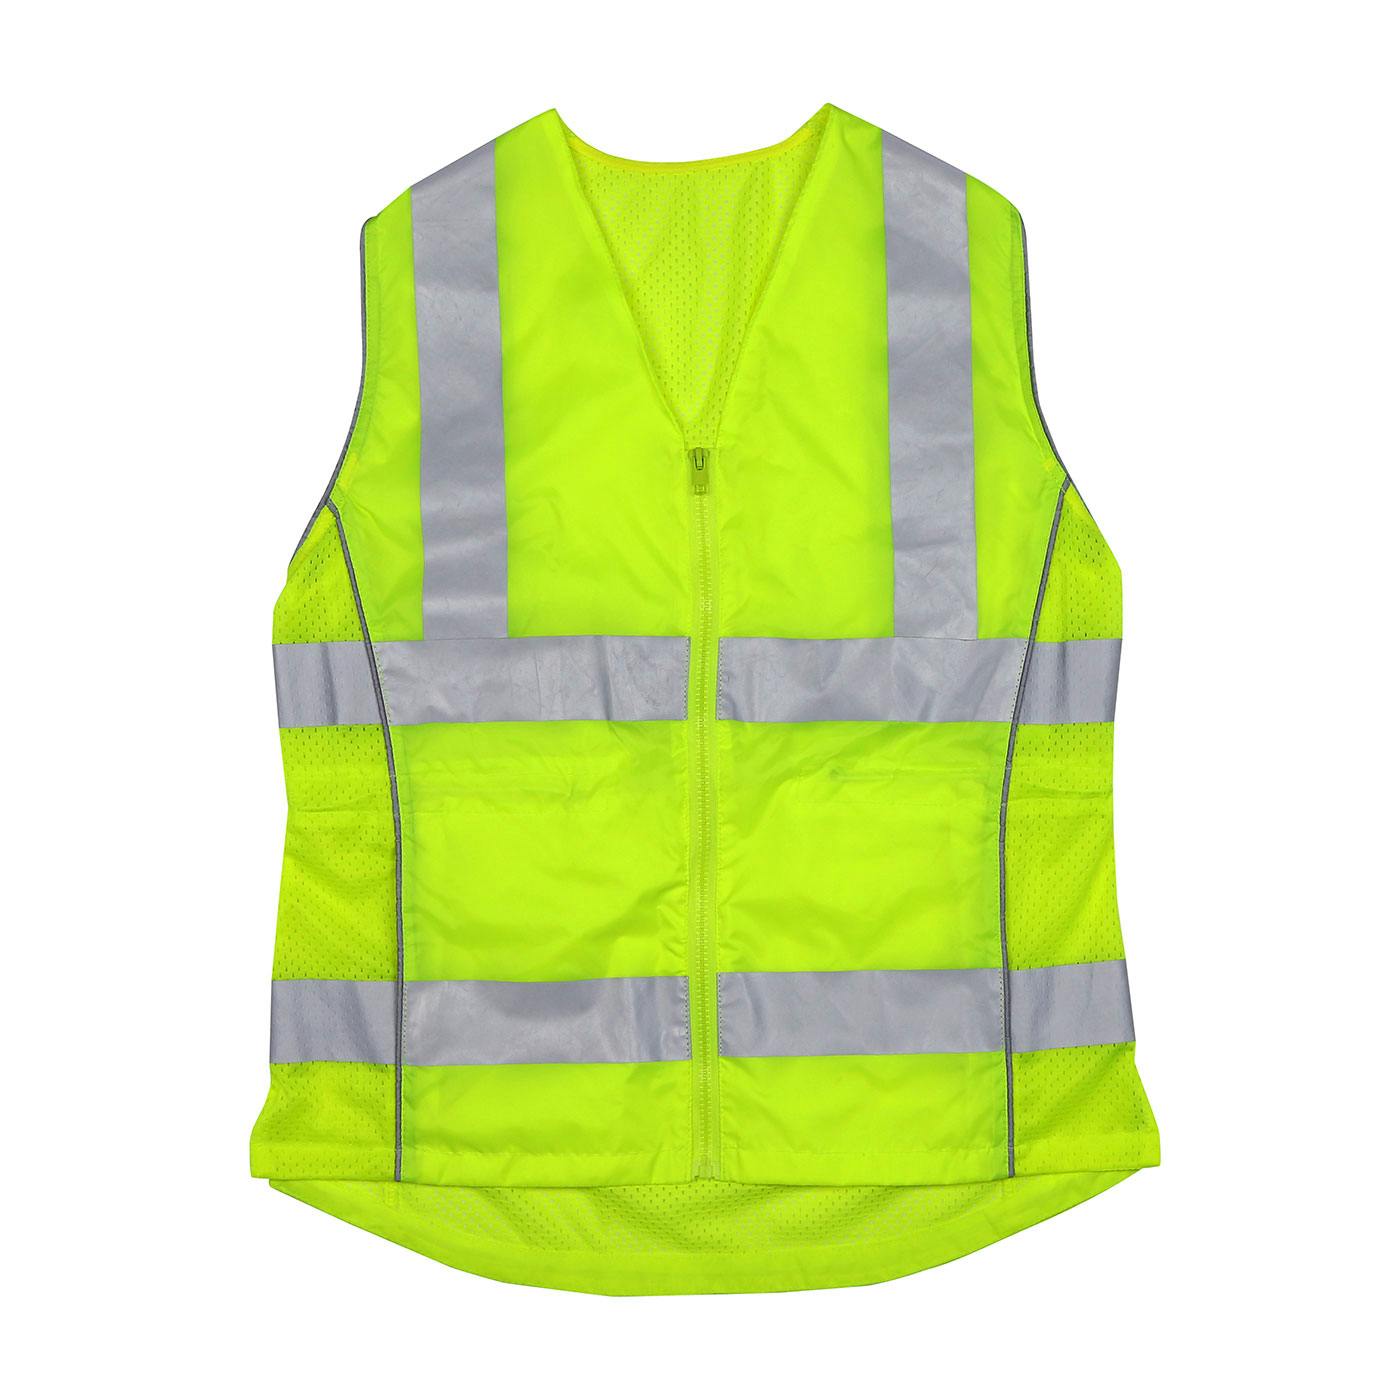 ANSI Type R Class 2 Women's Contoured Vest with Solid Front, Mesh Back and Adjustable Waist, Hi-Vis Yellow (302-0312)_0